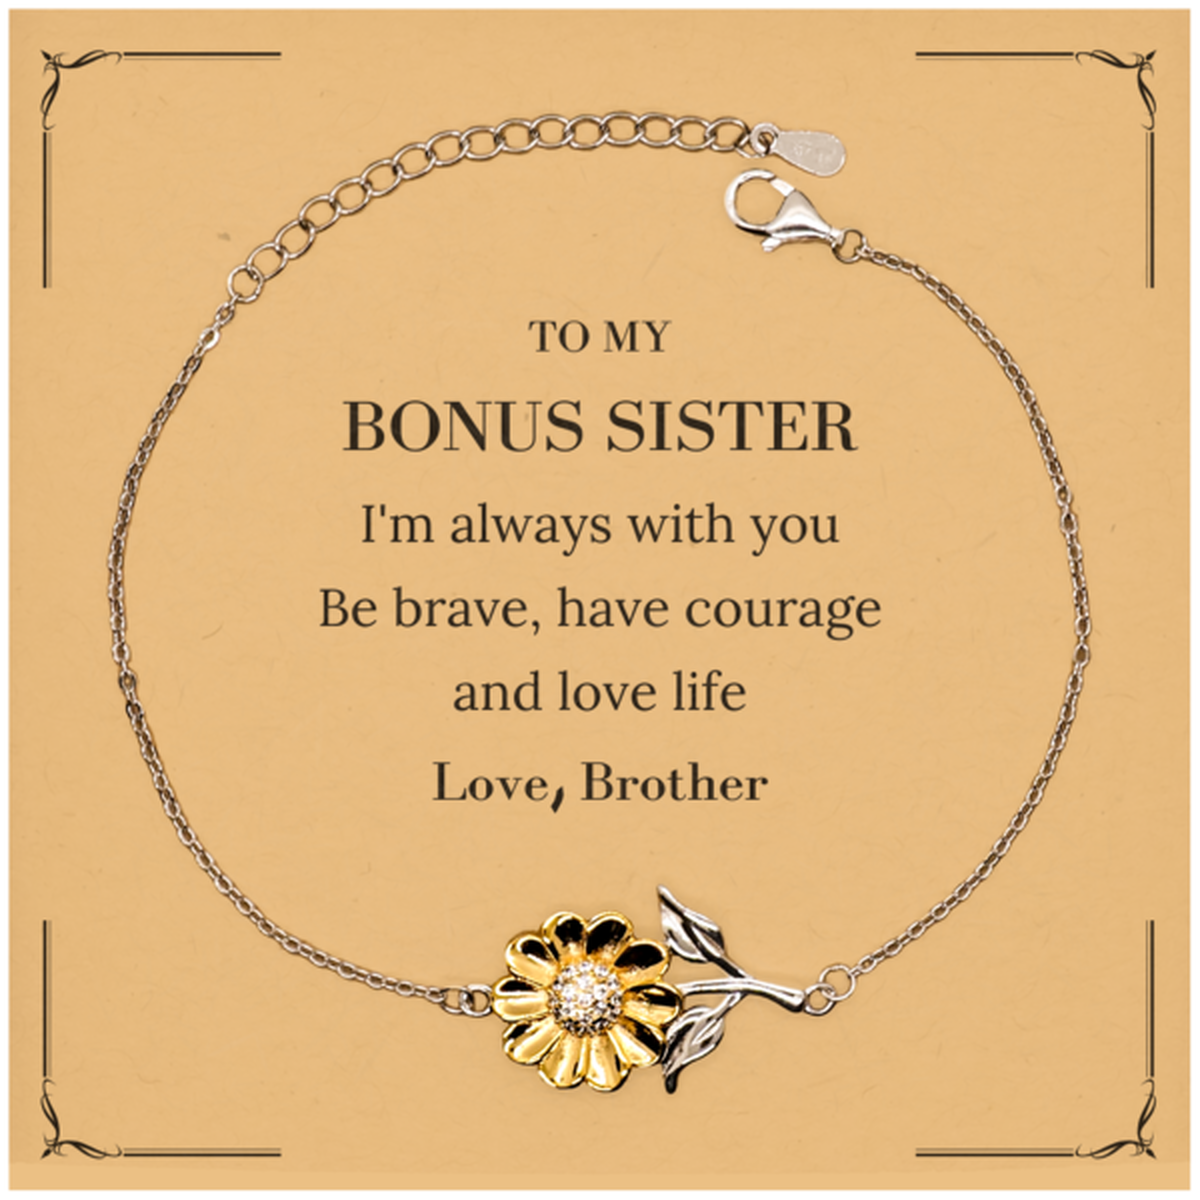 To My Bonus Sister Gifts from Brother, Unique Sunflower Bracelet Inspirational Christmas Birthday Graduation Gifts for Bonus Sister I'm always with you. Be brave, have courage and love life. Love, Brother